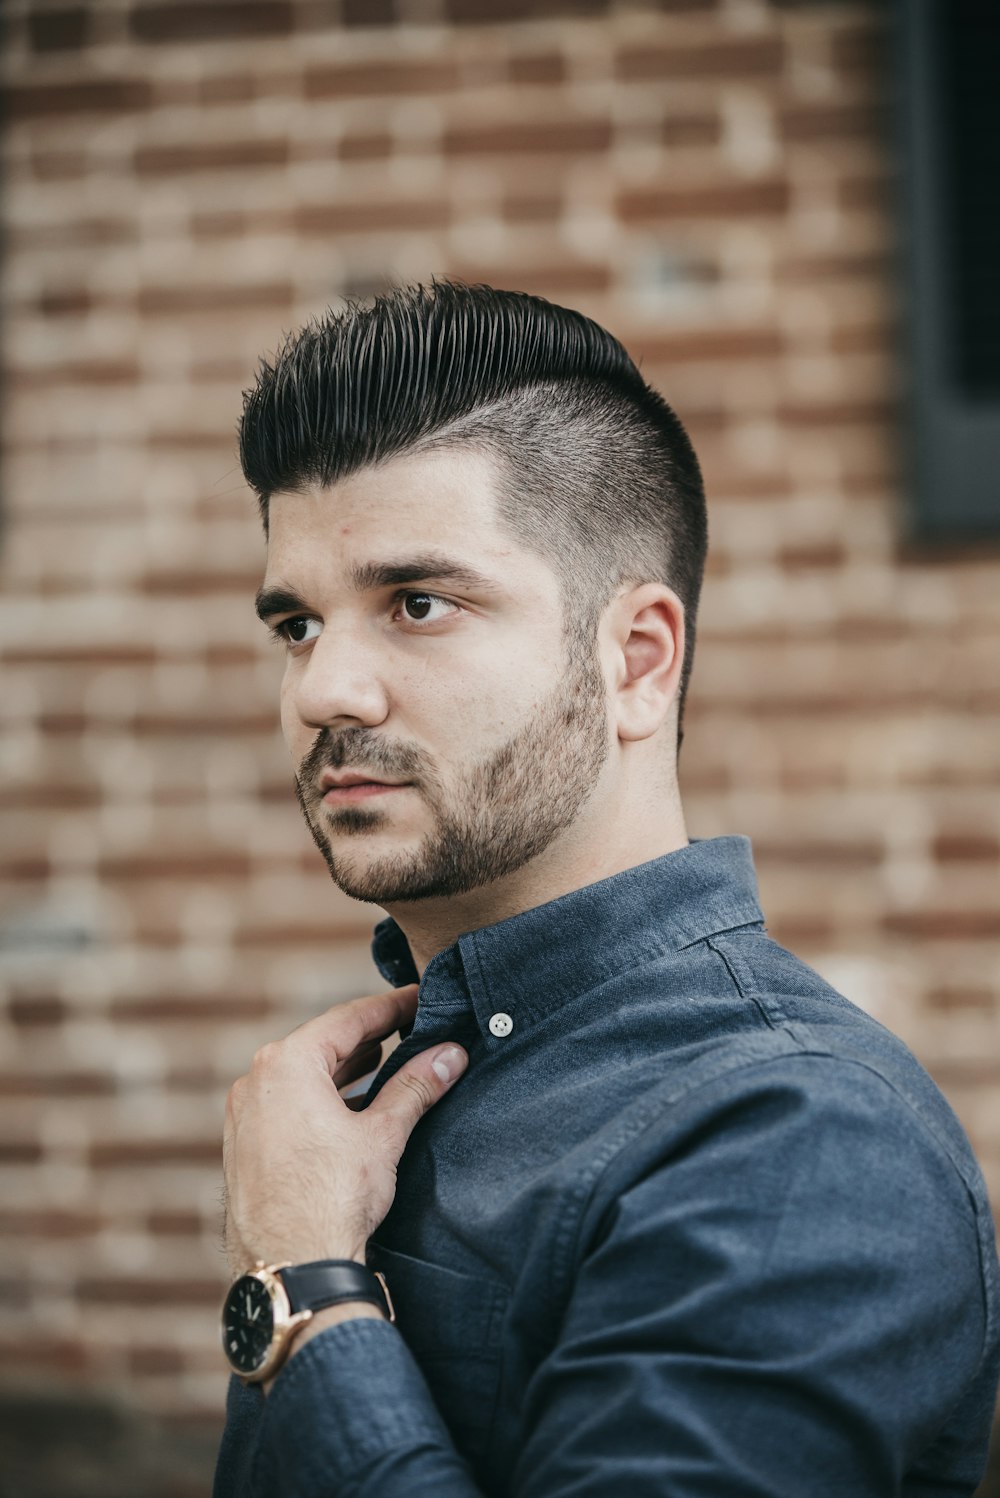 500+ Haircut Pictures | Download Free Images on Unsplash